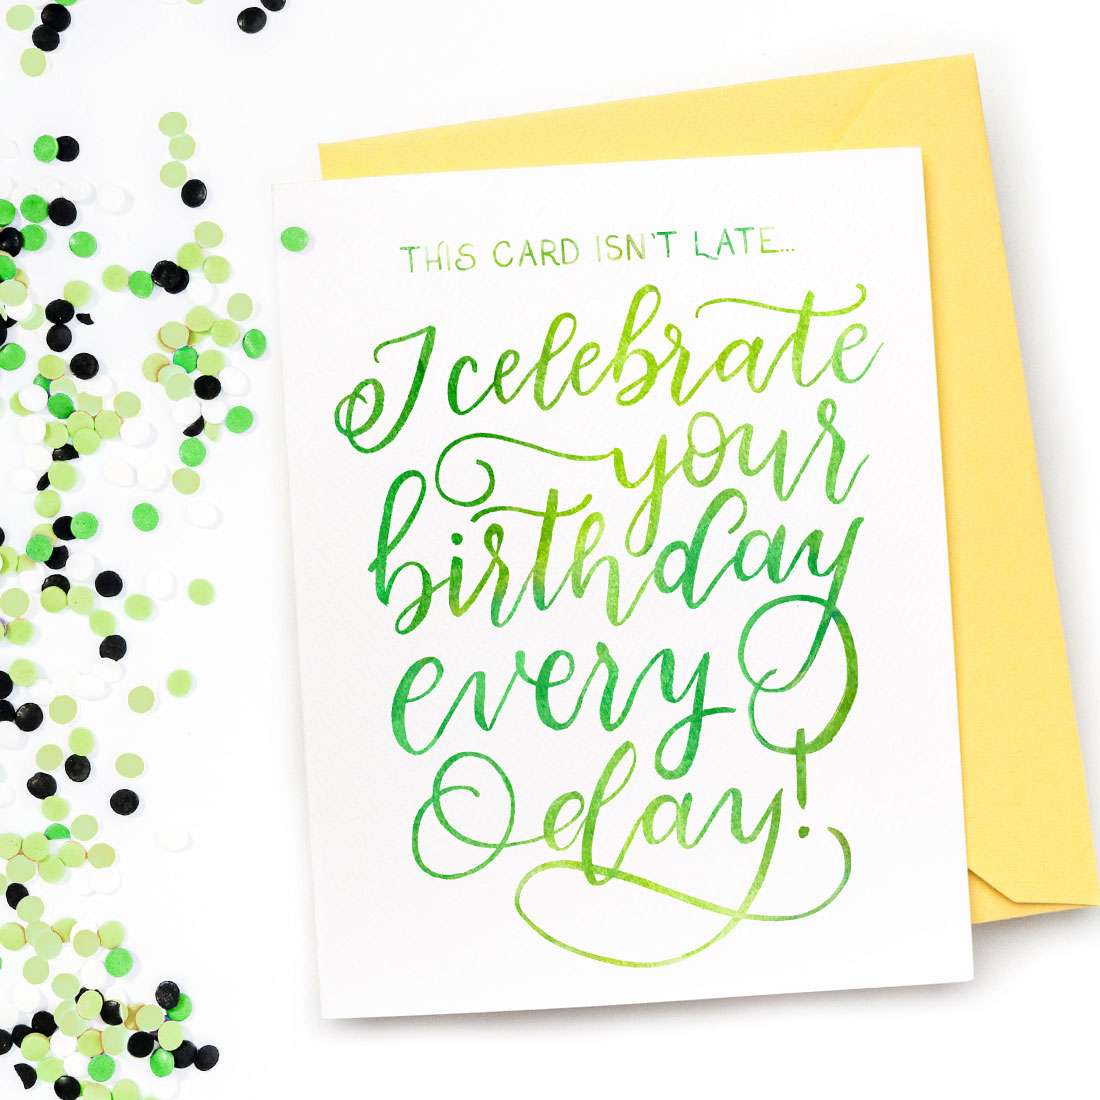 Image of a hand-lettered watercolor card saying "This card isn't late... I celebrate your birthday every day" by CharmCat | charmcat.net